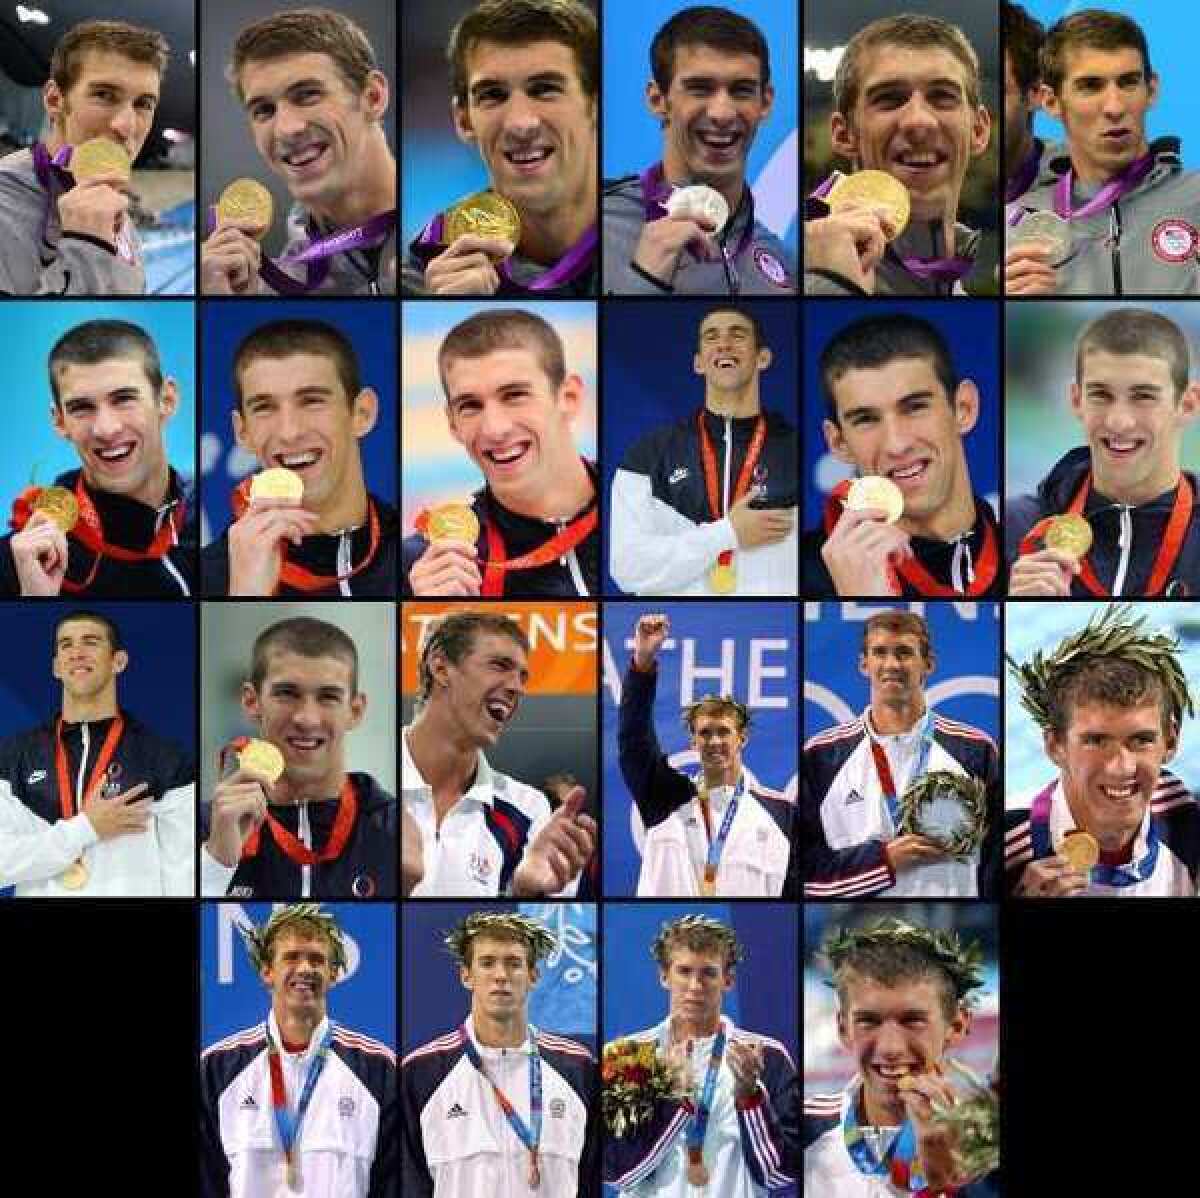 Michael Phelps shown with the 22 medals (18 gold, 2 silver, 2 bronze) he won during the Olympic Games in Athens, Beijing and London.